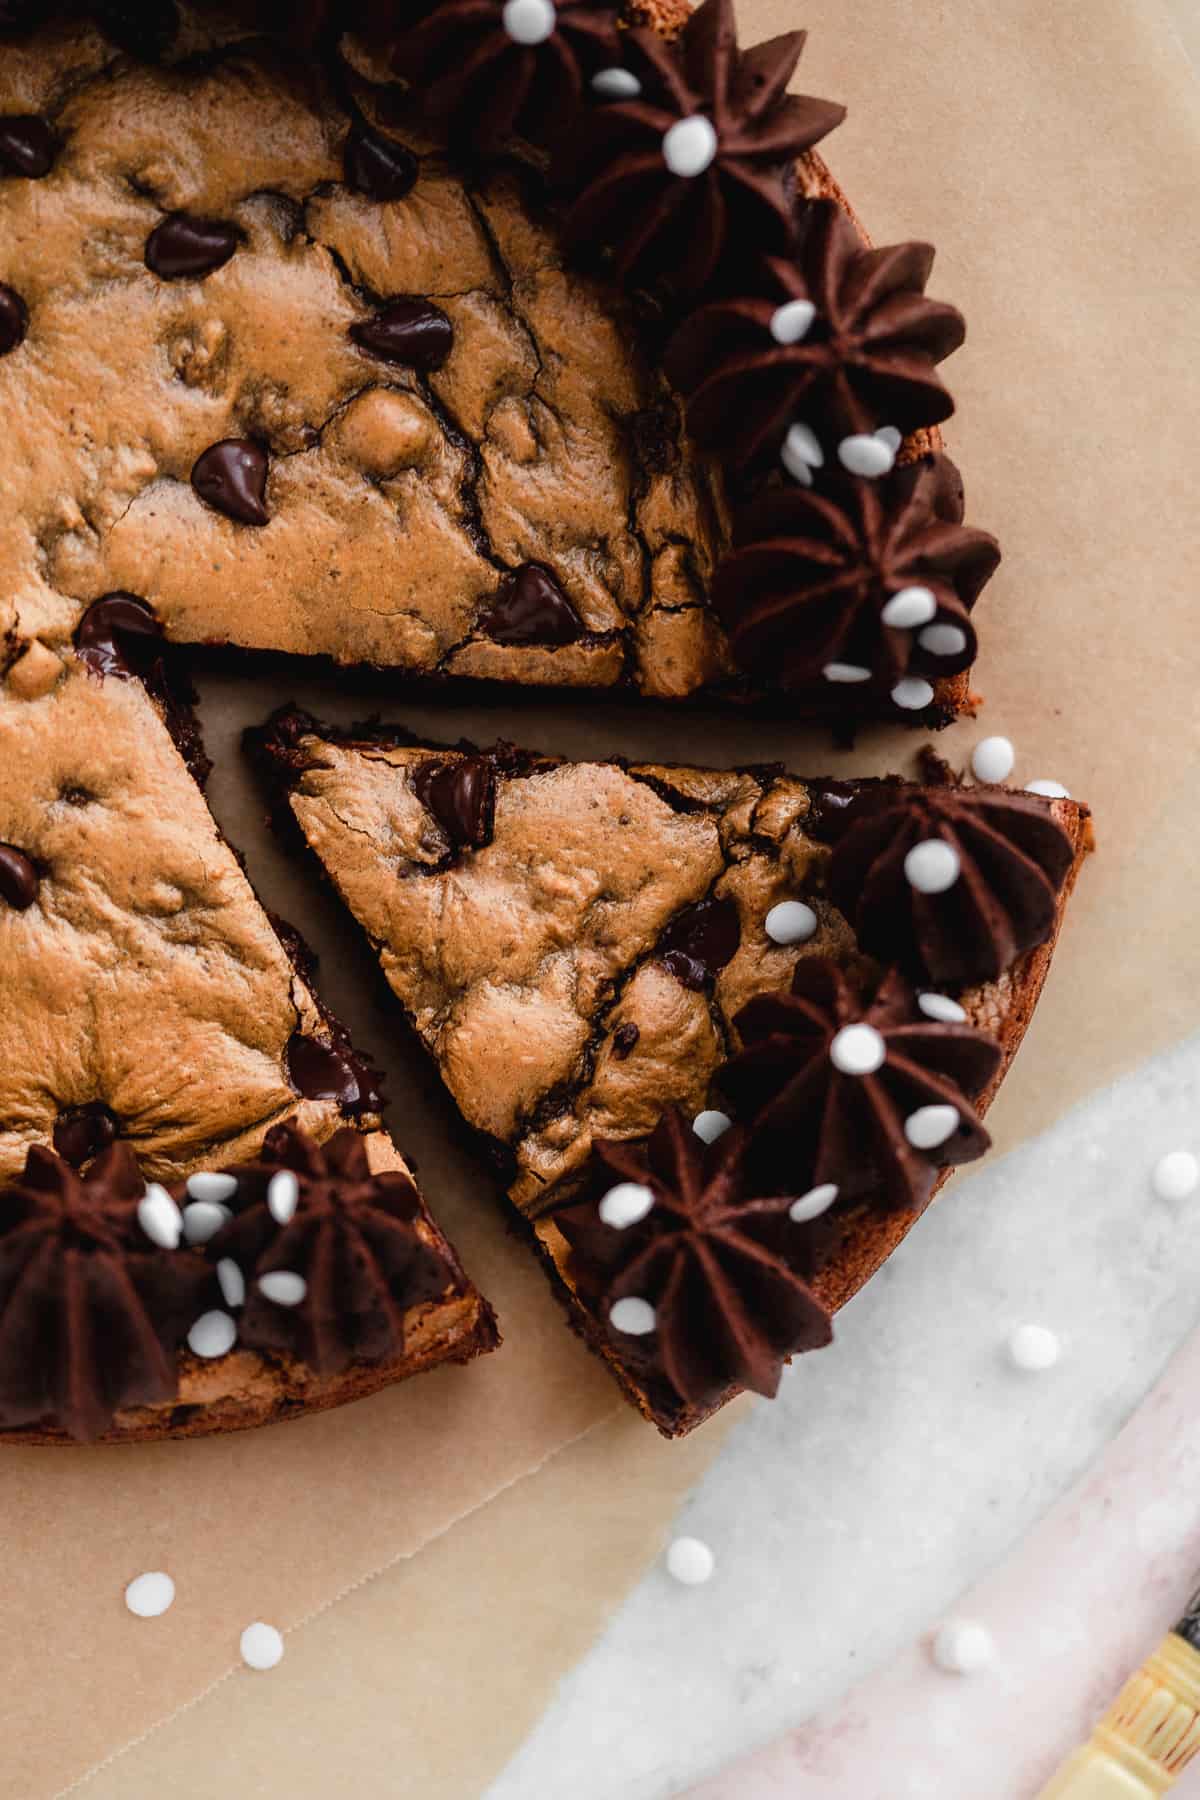 Close up photo of chocolate chip cookie cake on brown parchment paper.  A triangular slice of cookie cake has been cut and placed nearby.  